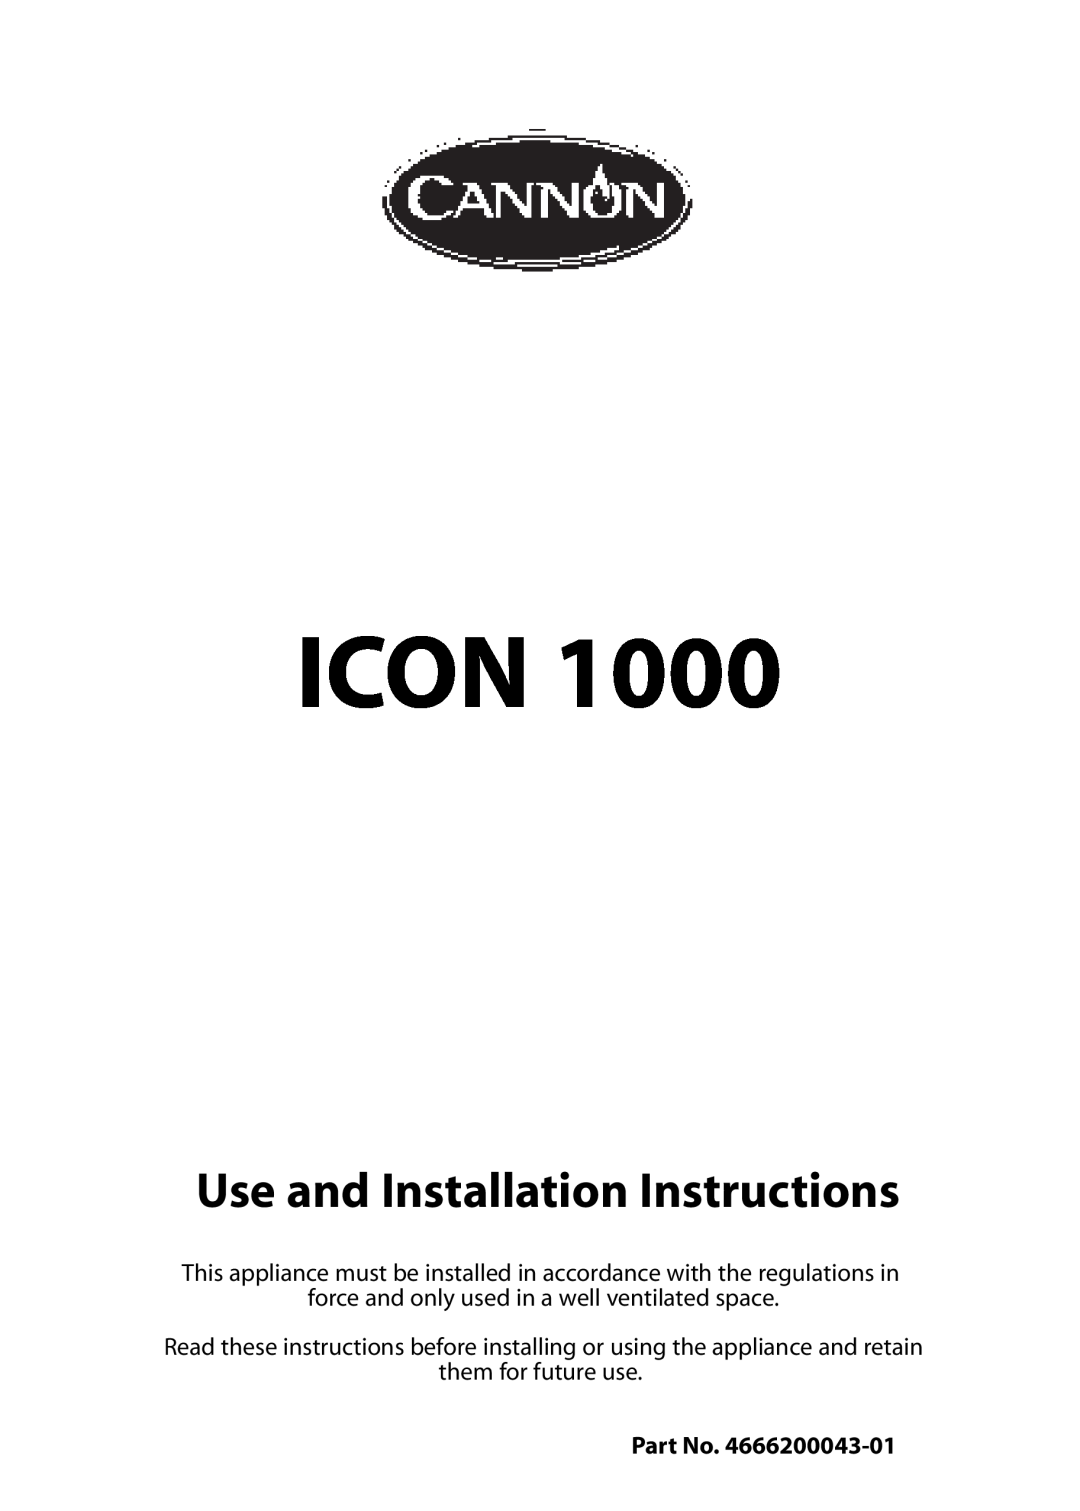 Cannon 10425G, ICON 1000 installation instructions Icon, Use and Installation Instructions 